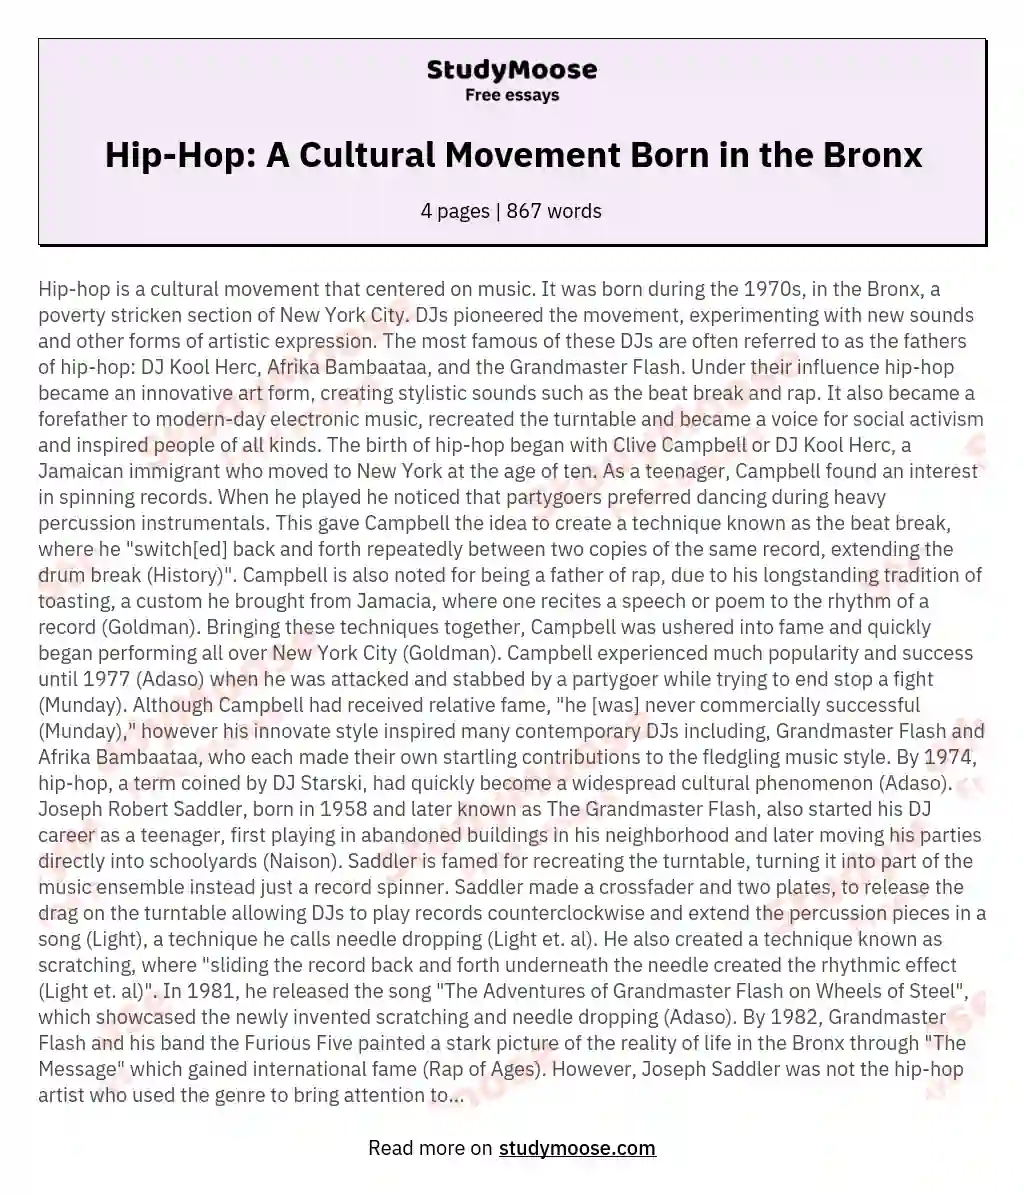 HipHop History